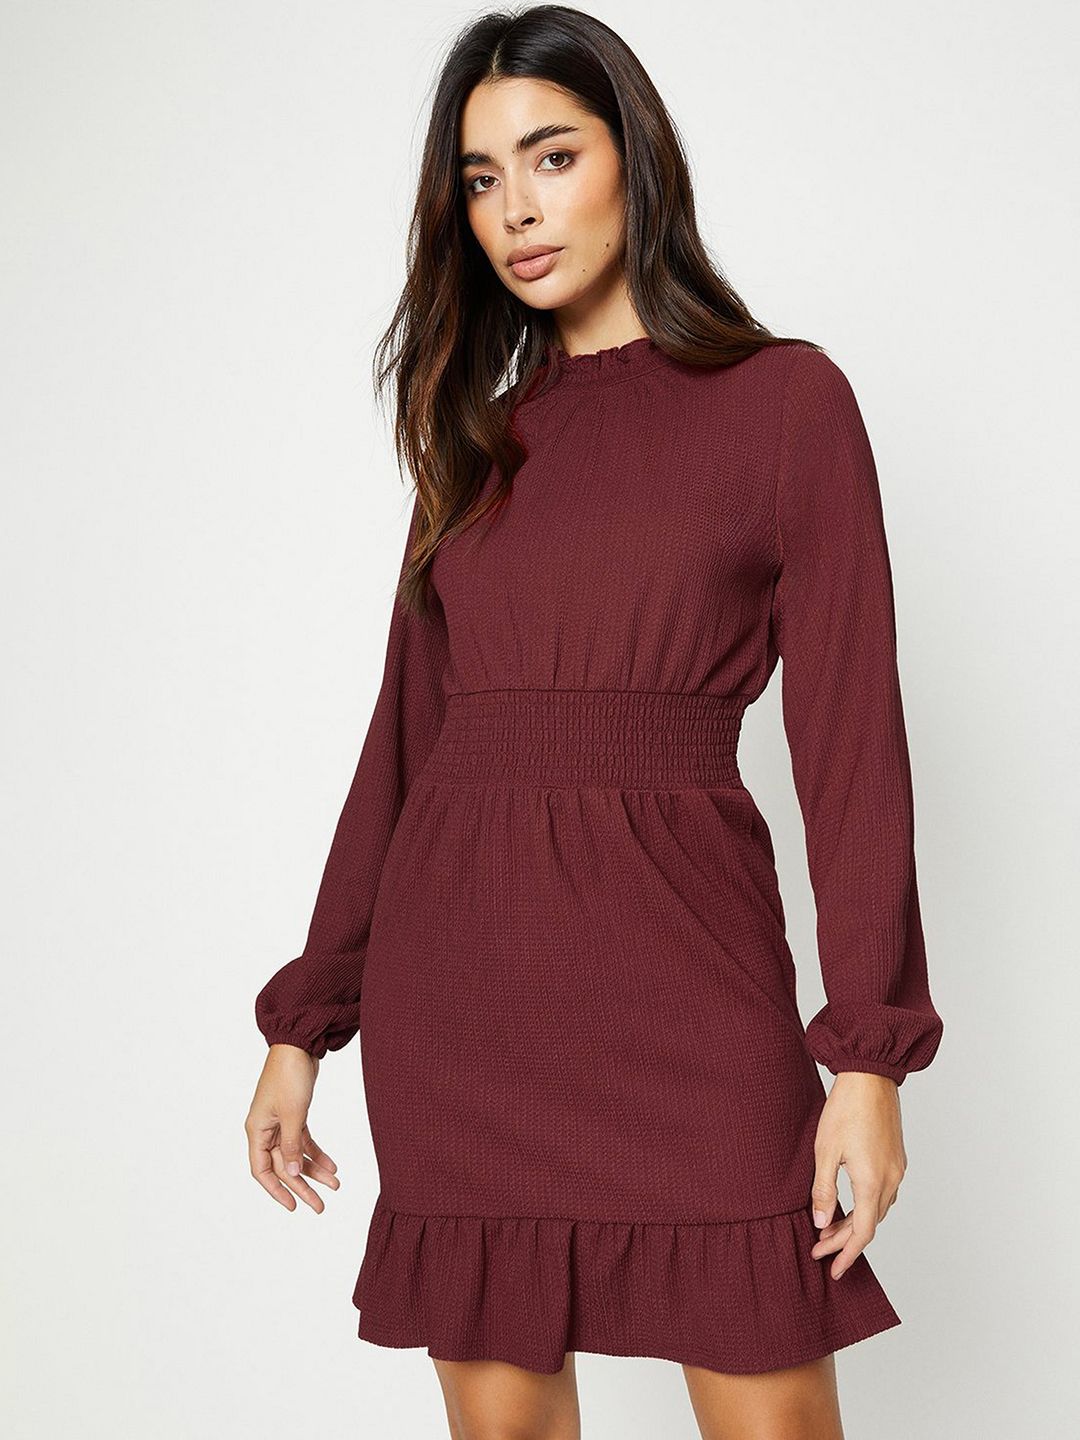 DOROTHY PERKINS Shirred Waist Fit & Flare Mini Dress Price in India